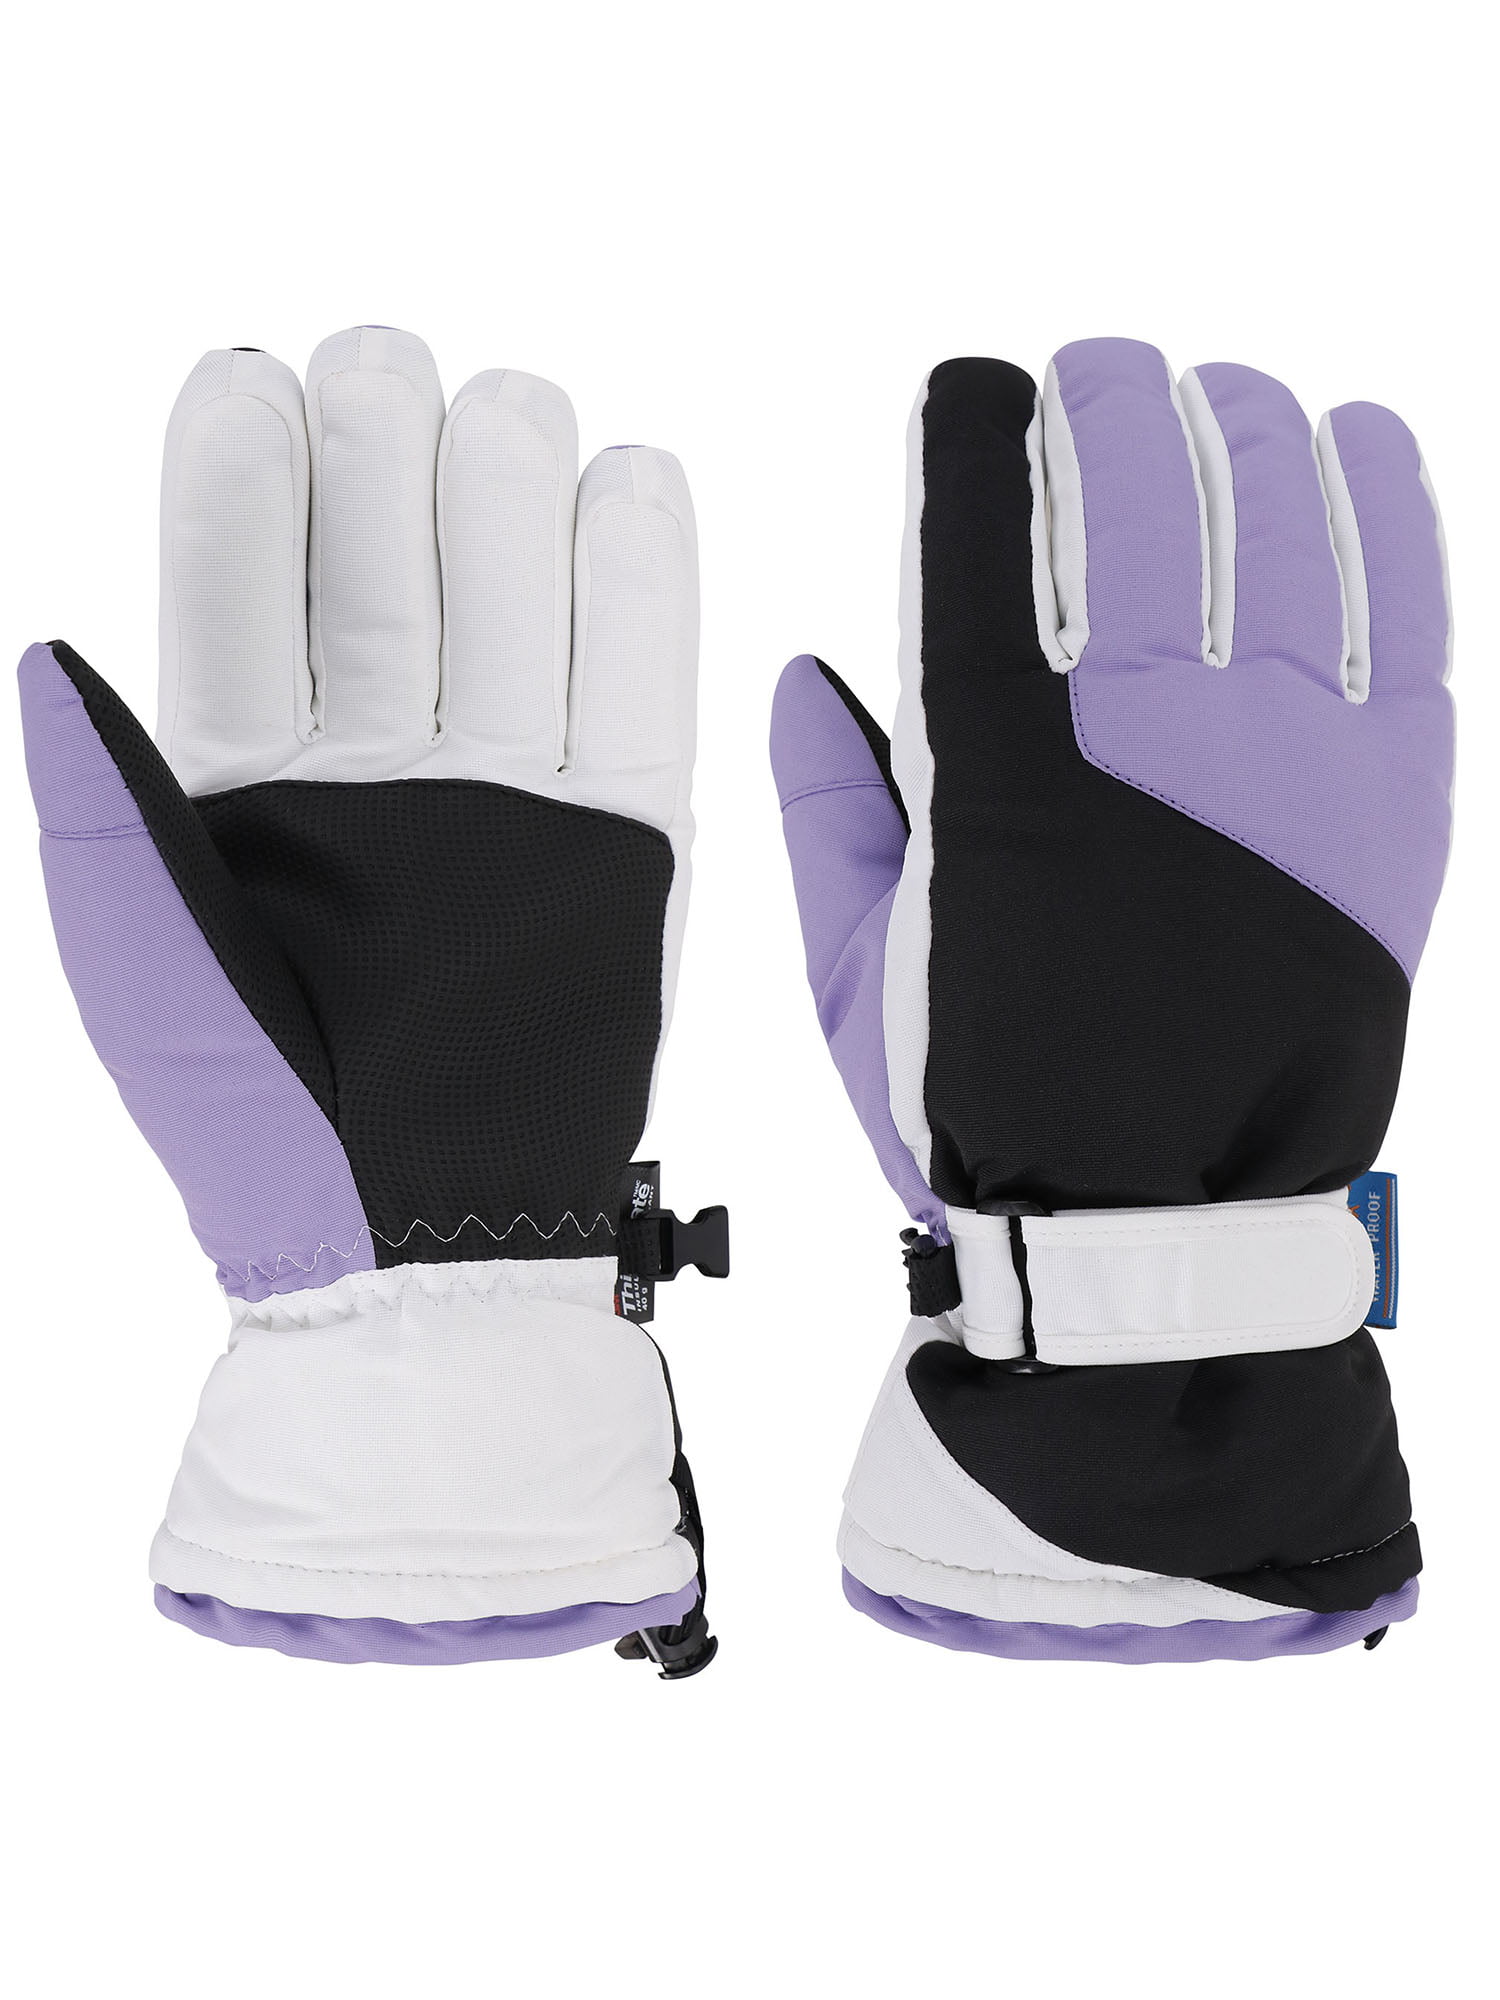 Details about   Simplicity 3M Women's Thinsulate Ski Gloves LARGE Black and Blue 